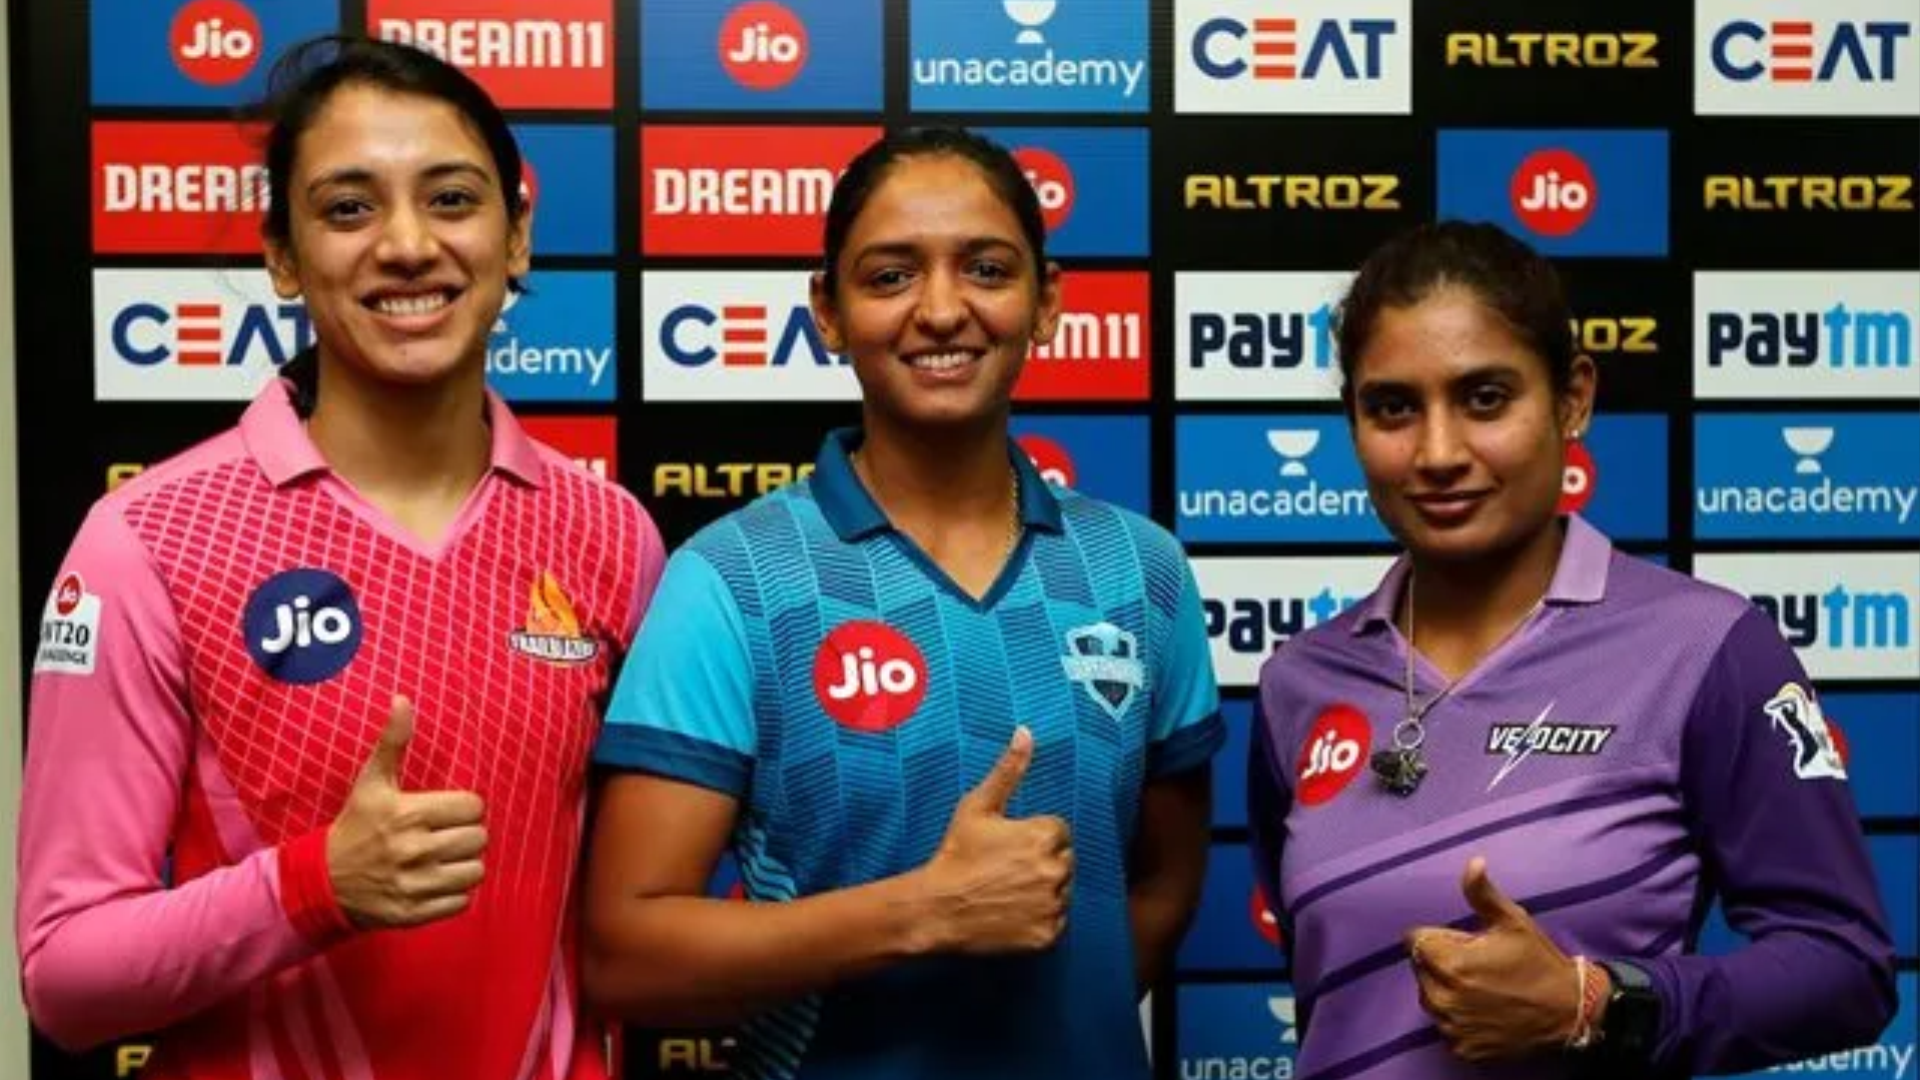 After The Men's IPL, BCCI Has Now Announced The Date Of The Women's IPL Set To Happen In 2023